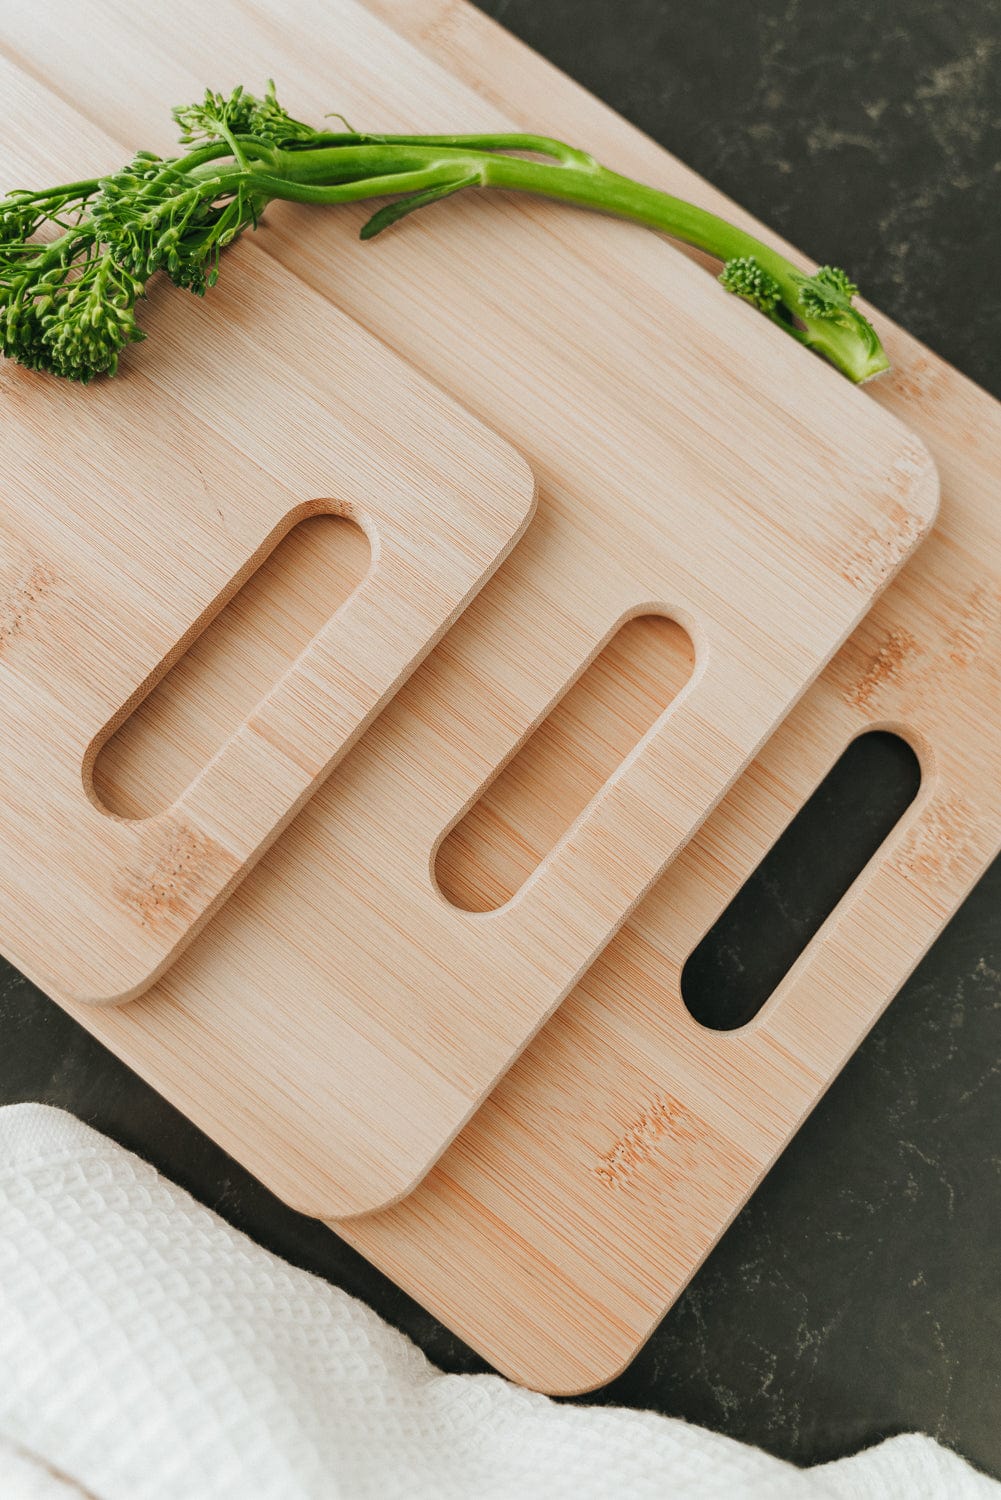 Living Today Kitchen 3 Pack Bamboo Wood Chopping Board Set Cheese Cutting & Serving Light Wood Tone